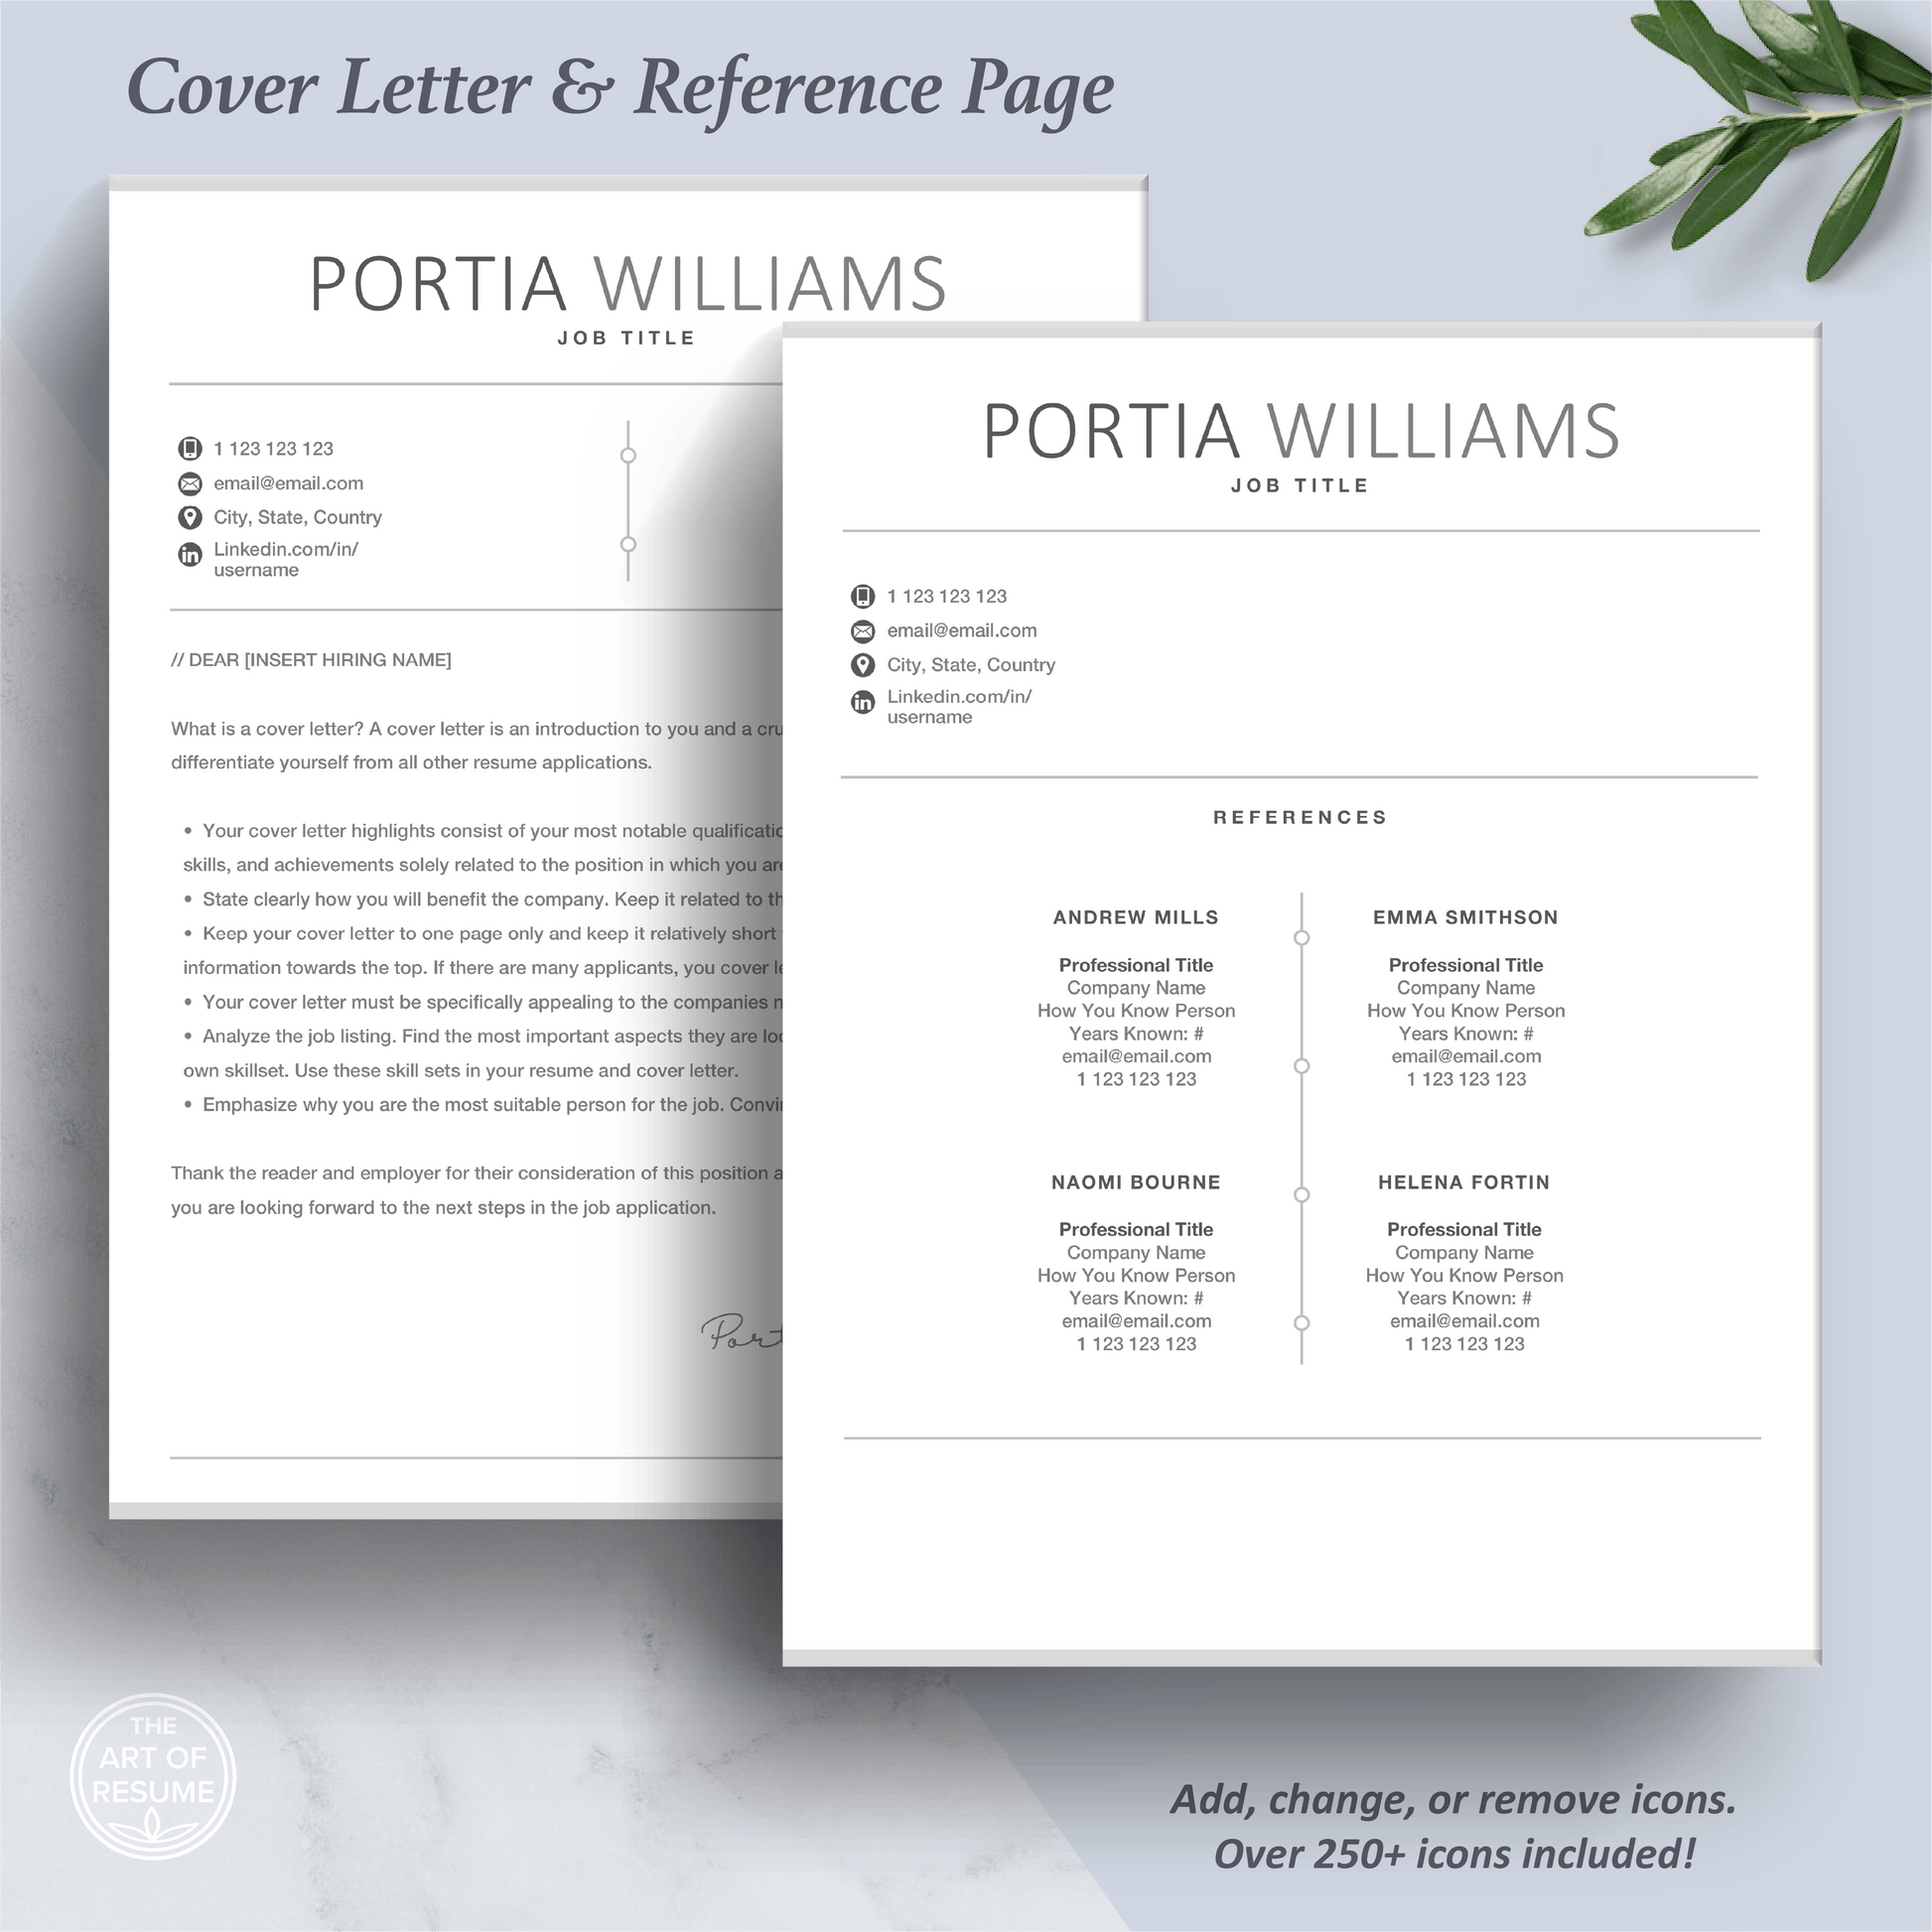 Resume Template for Student | Modern Resume Format for No Experience - The Art of Resume